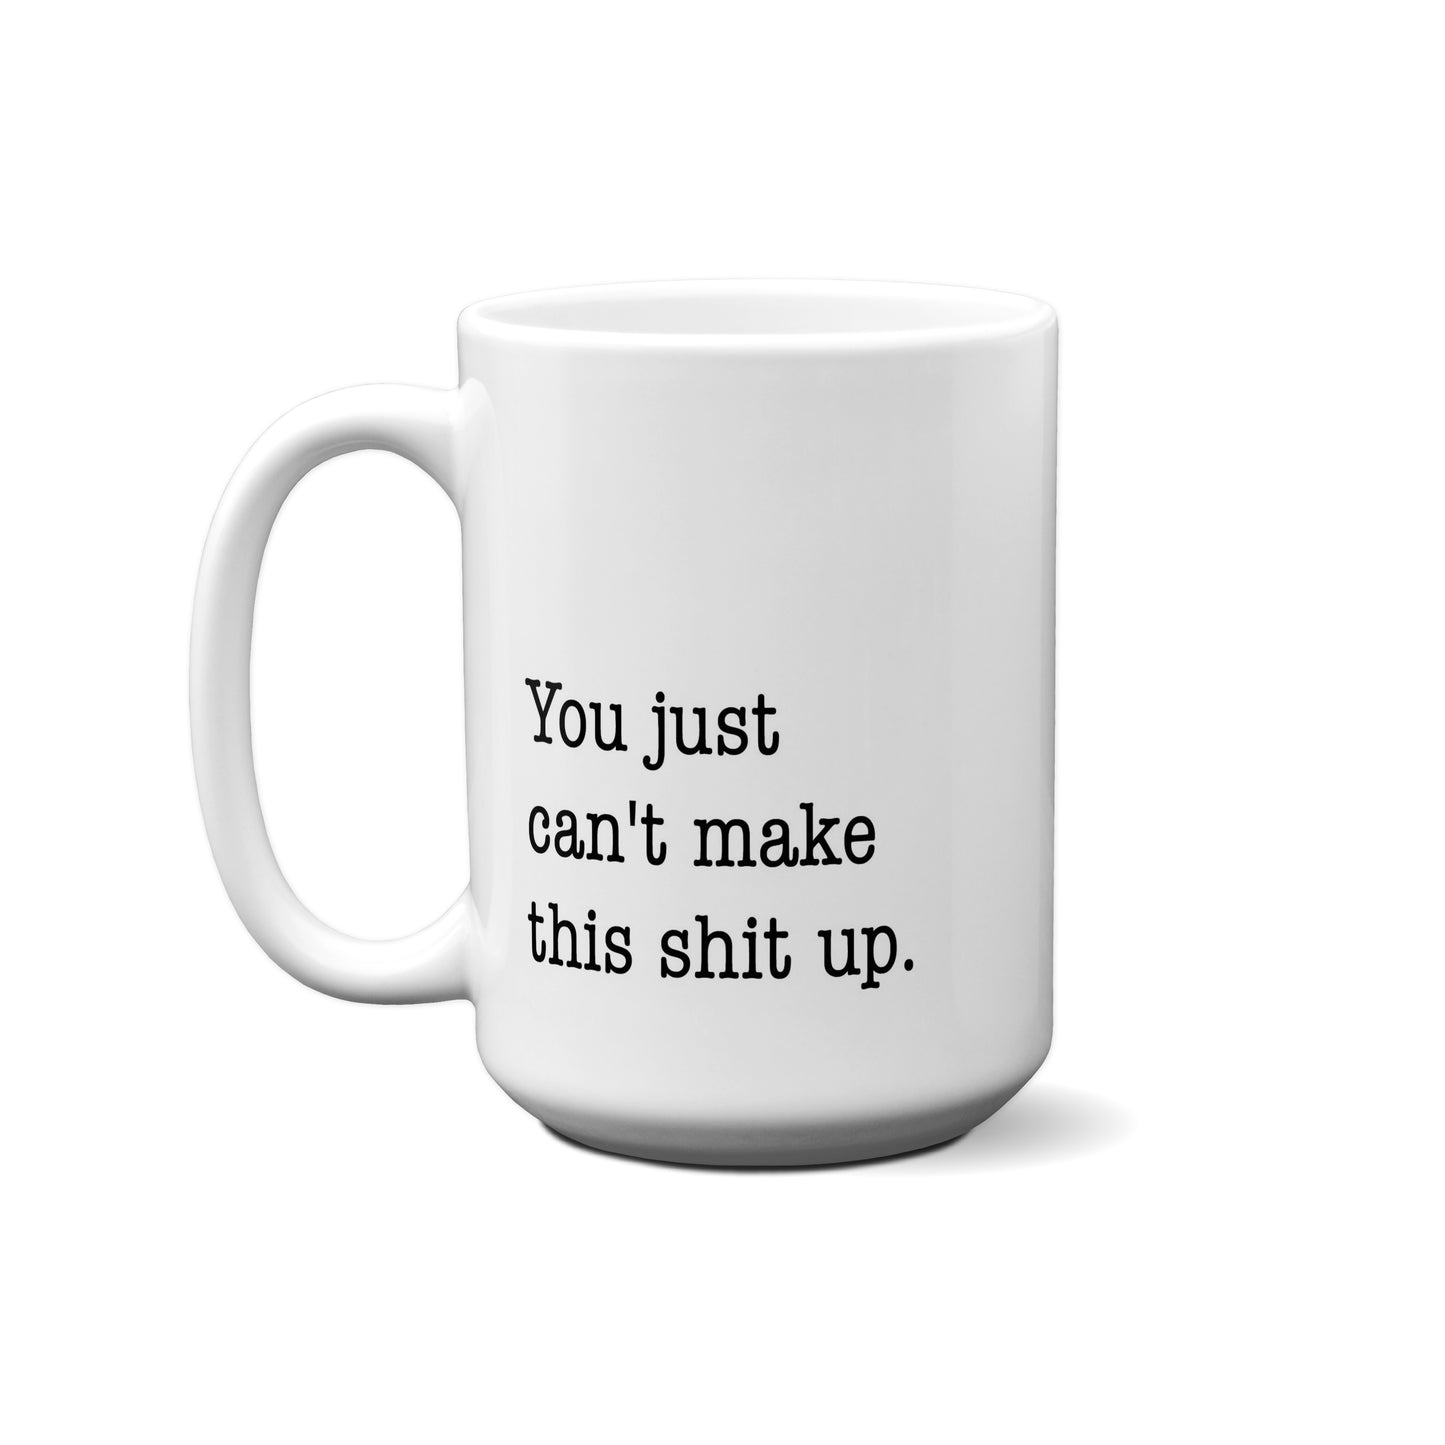 You Just Can't Make This Shit Up. Quote Mug